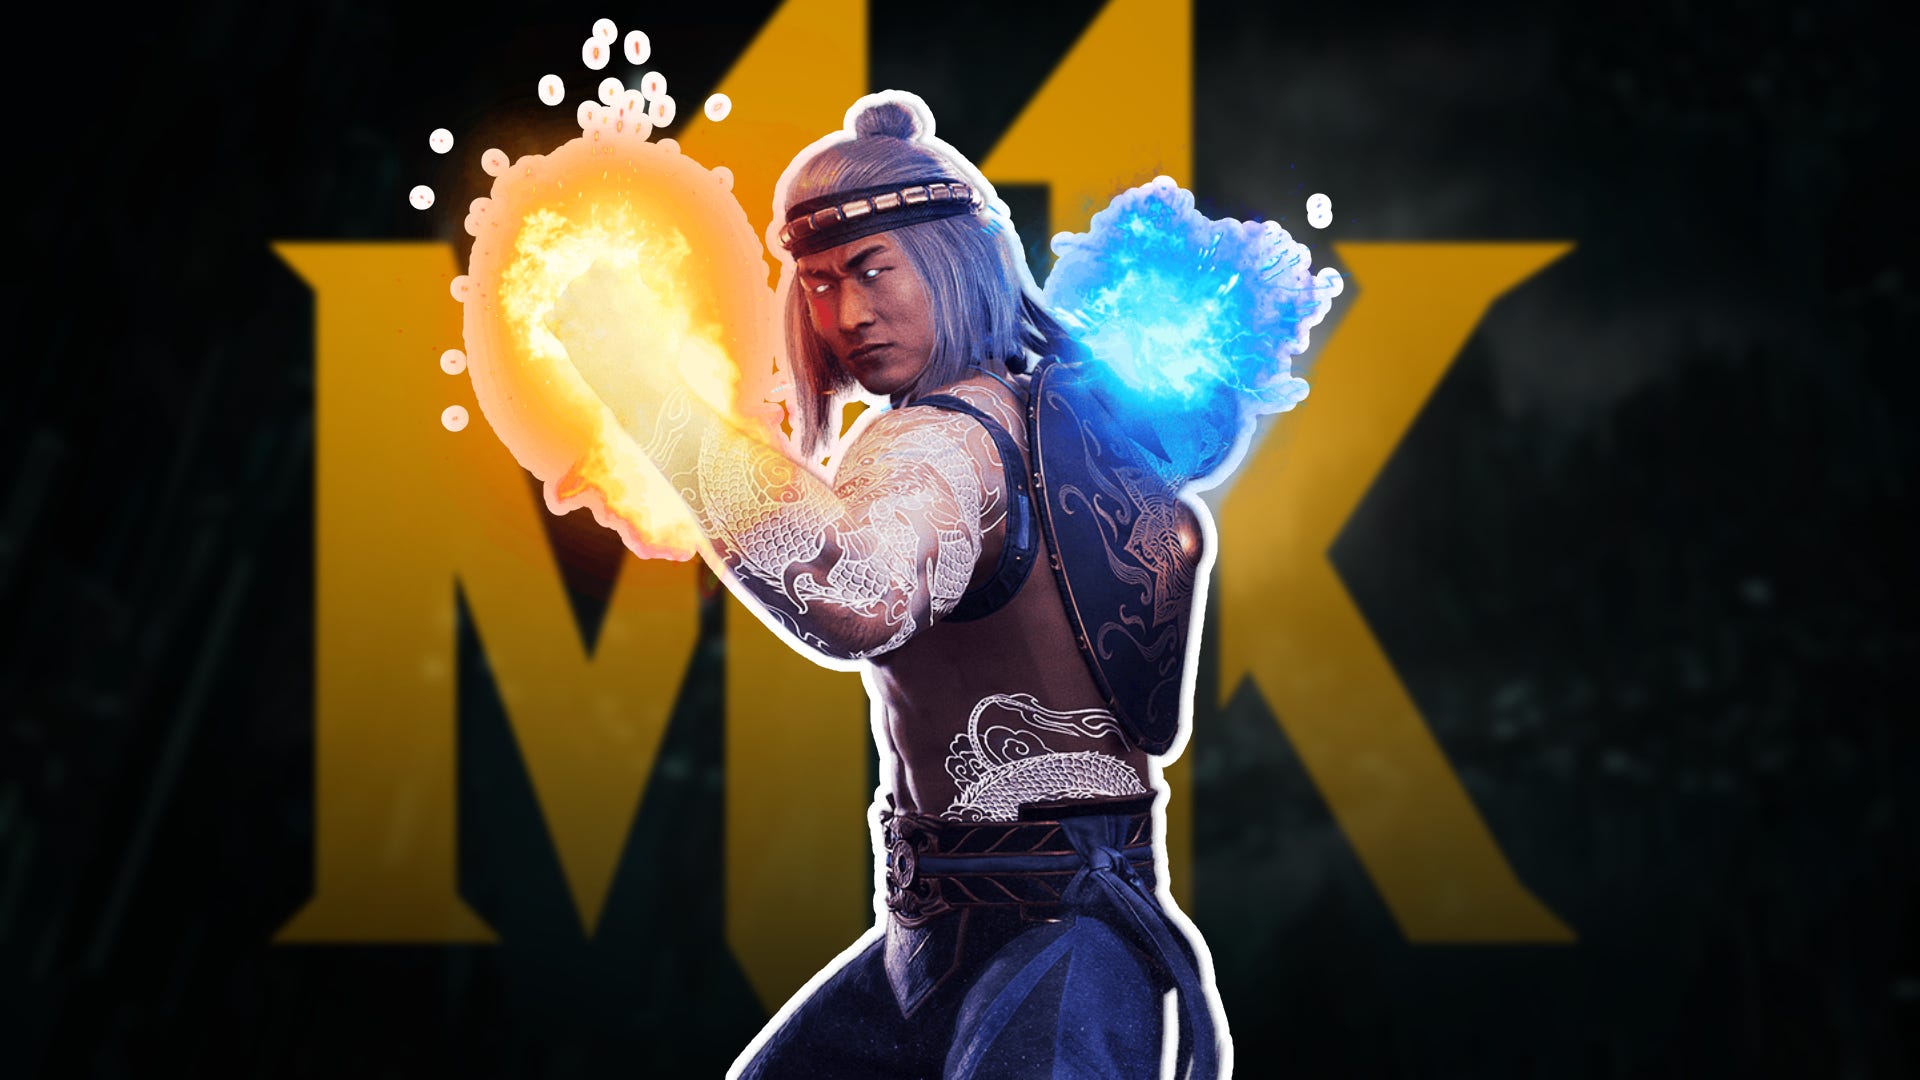 5 years on from Mortal Kombat 11’s series high-point, the games industry seems intent on making it the last MK I’ll ever love